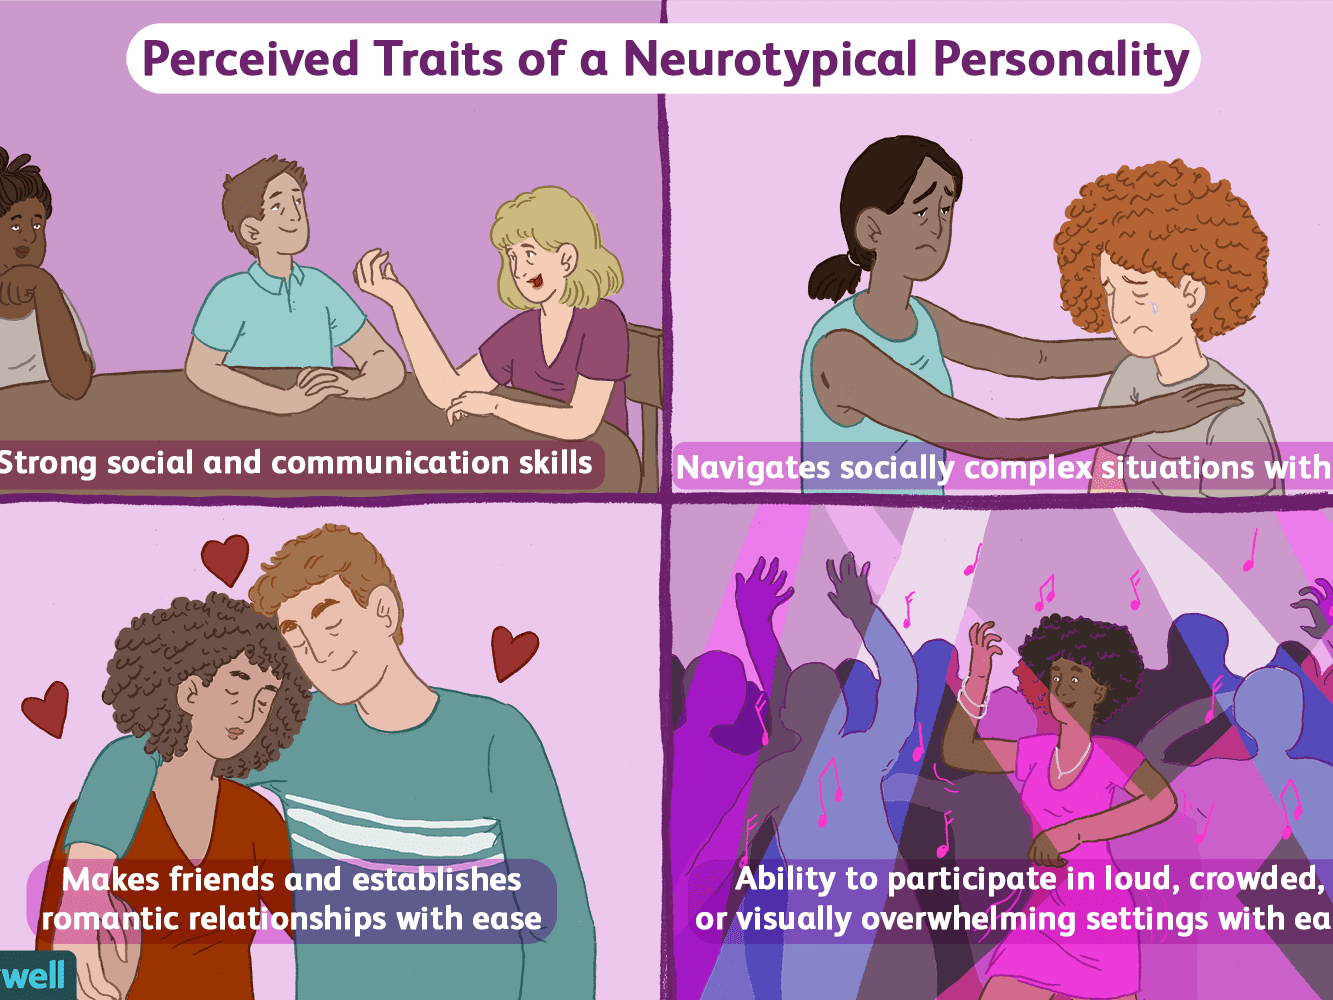 What Does It Mean to Be Neurotypical?